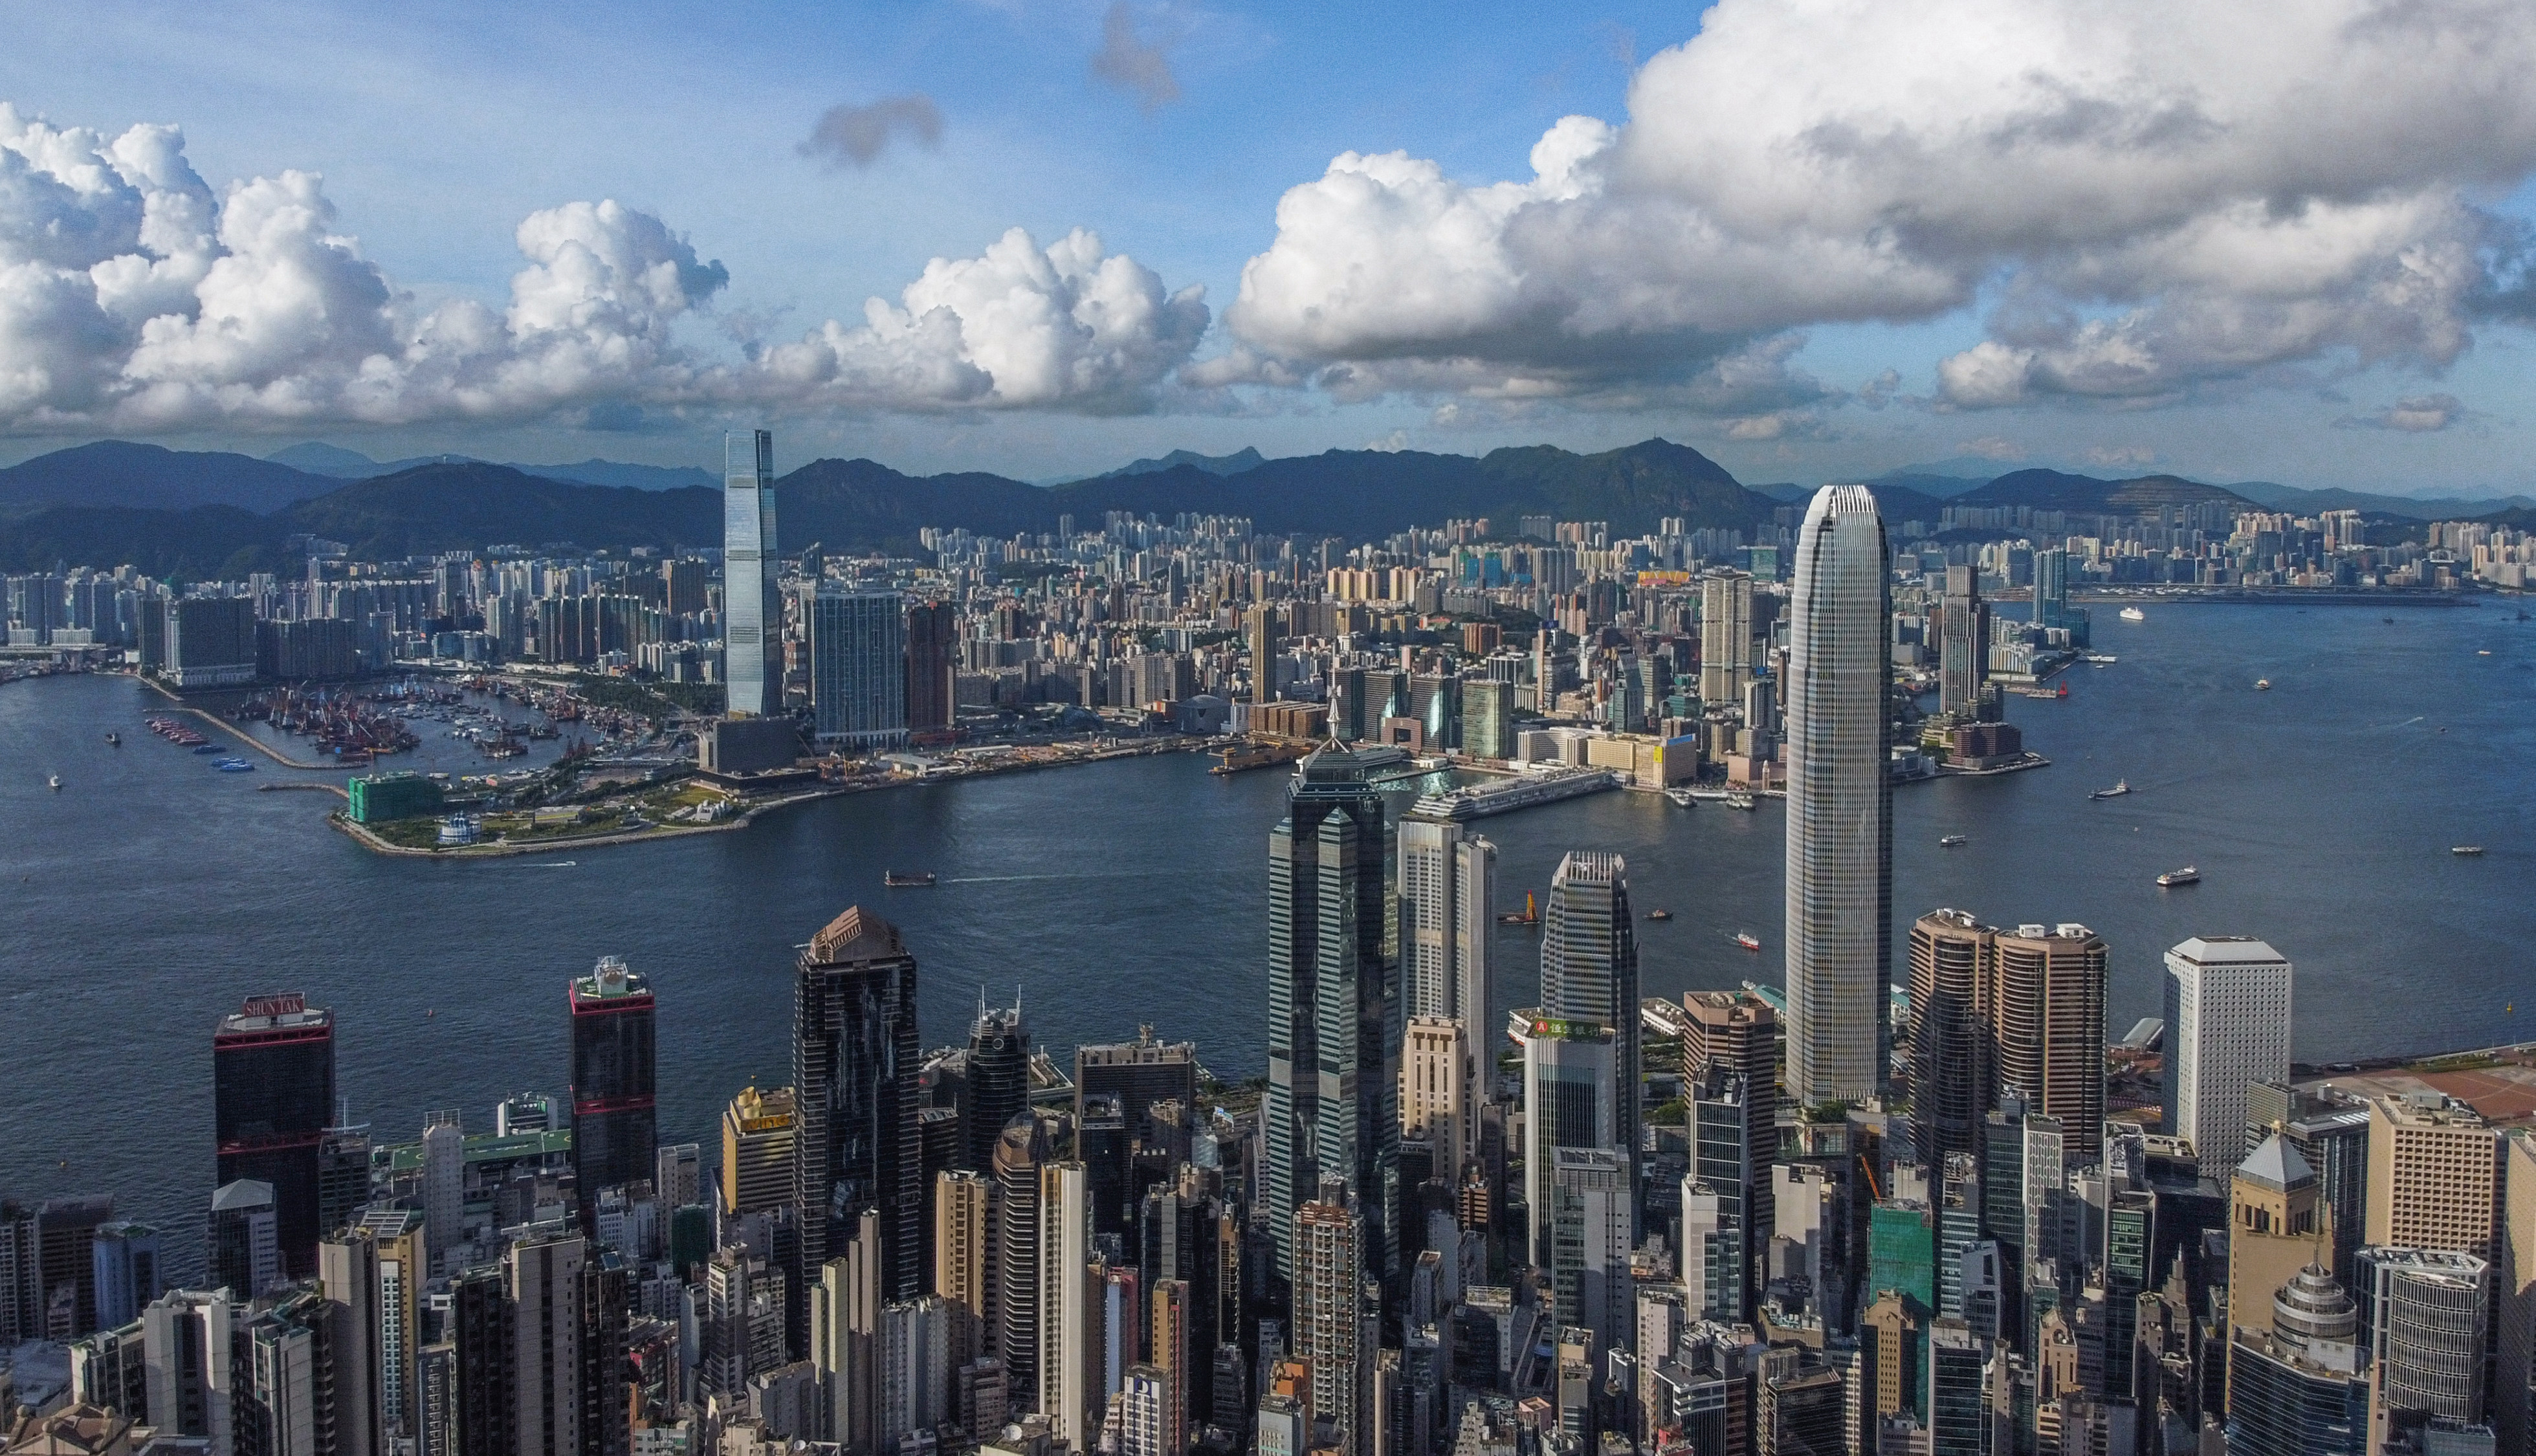 Hong Kong leader John Lee set a target of attracting 200 large family offices to the city by 2025. Photo: Sun Yeung